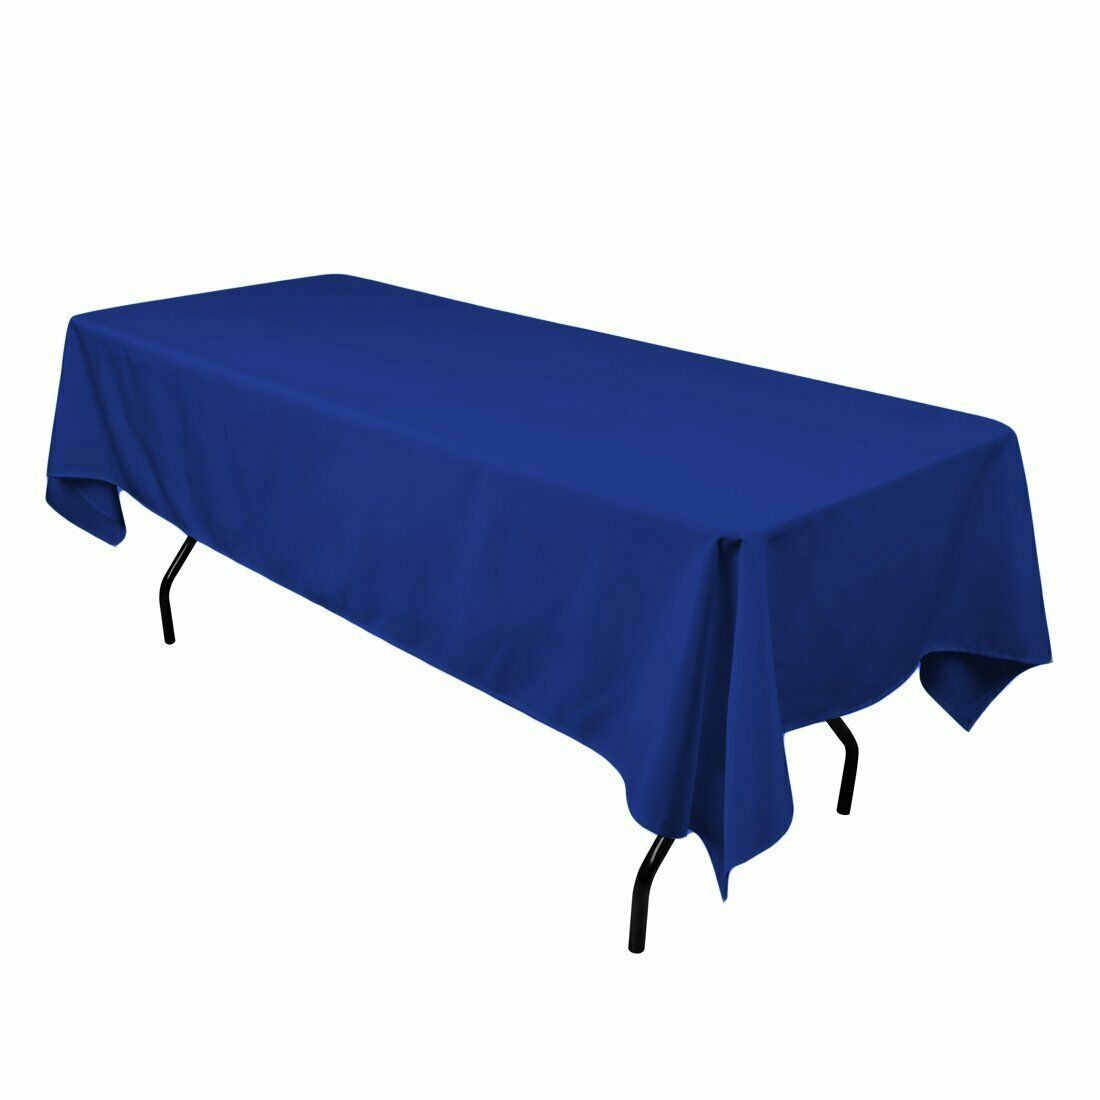 Primary image for 58"x120" - Royal Blue - Polyester Tablecloth Picnic Events Family Dinner